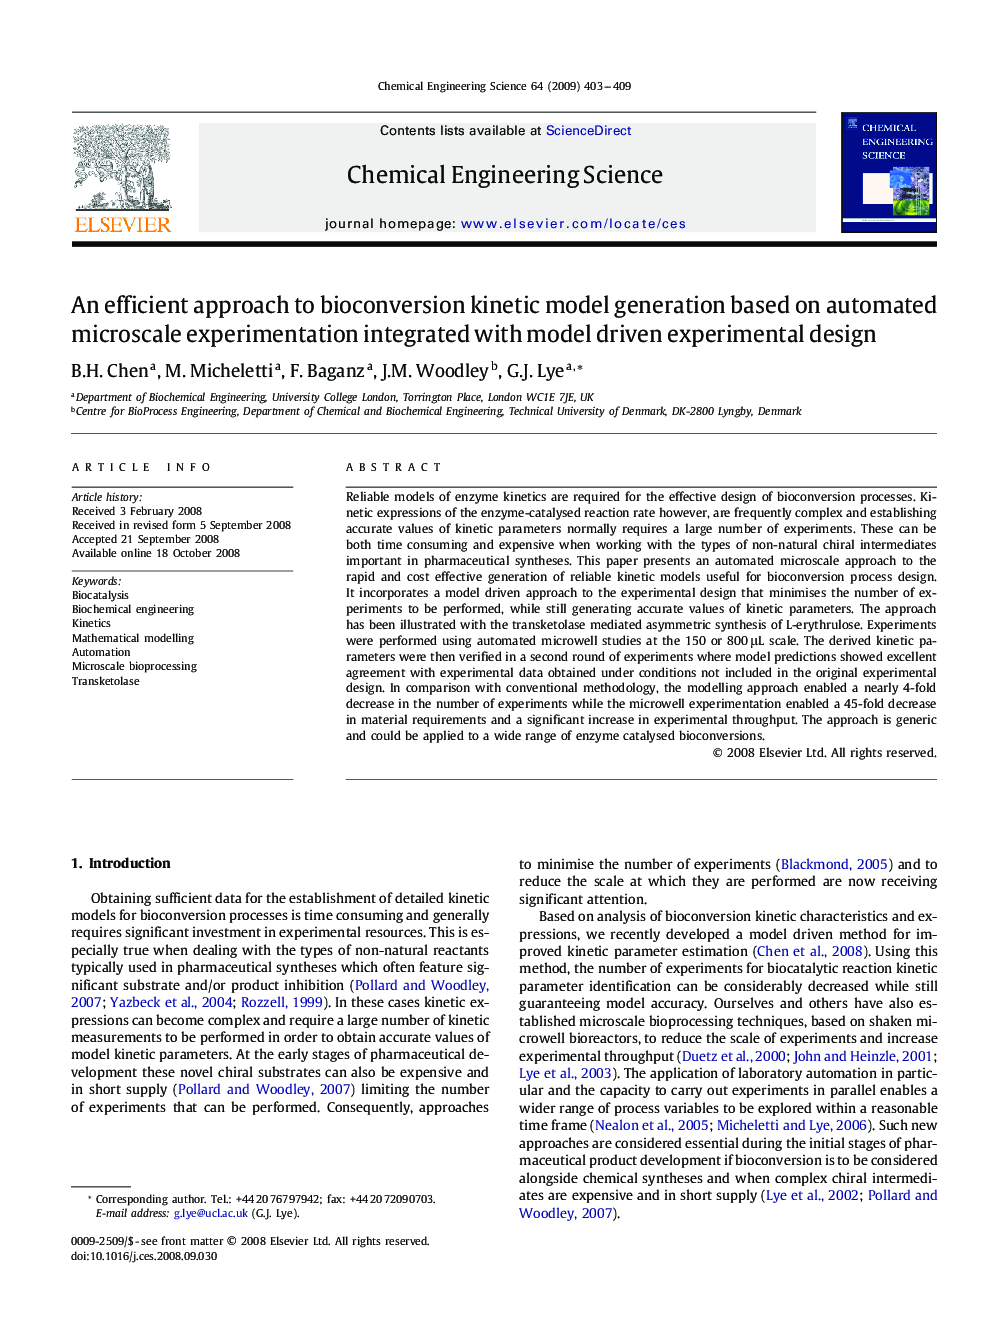 An efficient approach to bioconversion kinetic model generation based on automated microscale experimentation integrated with model driven experimental design